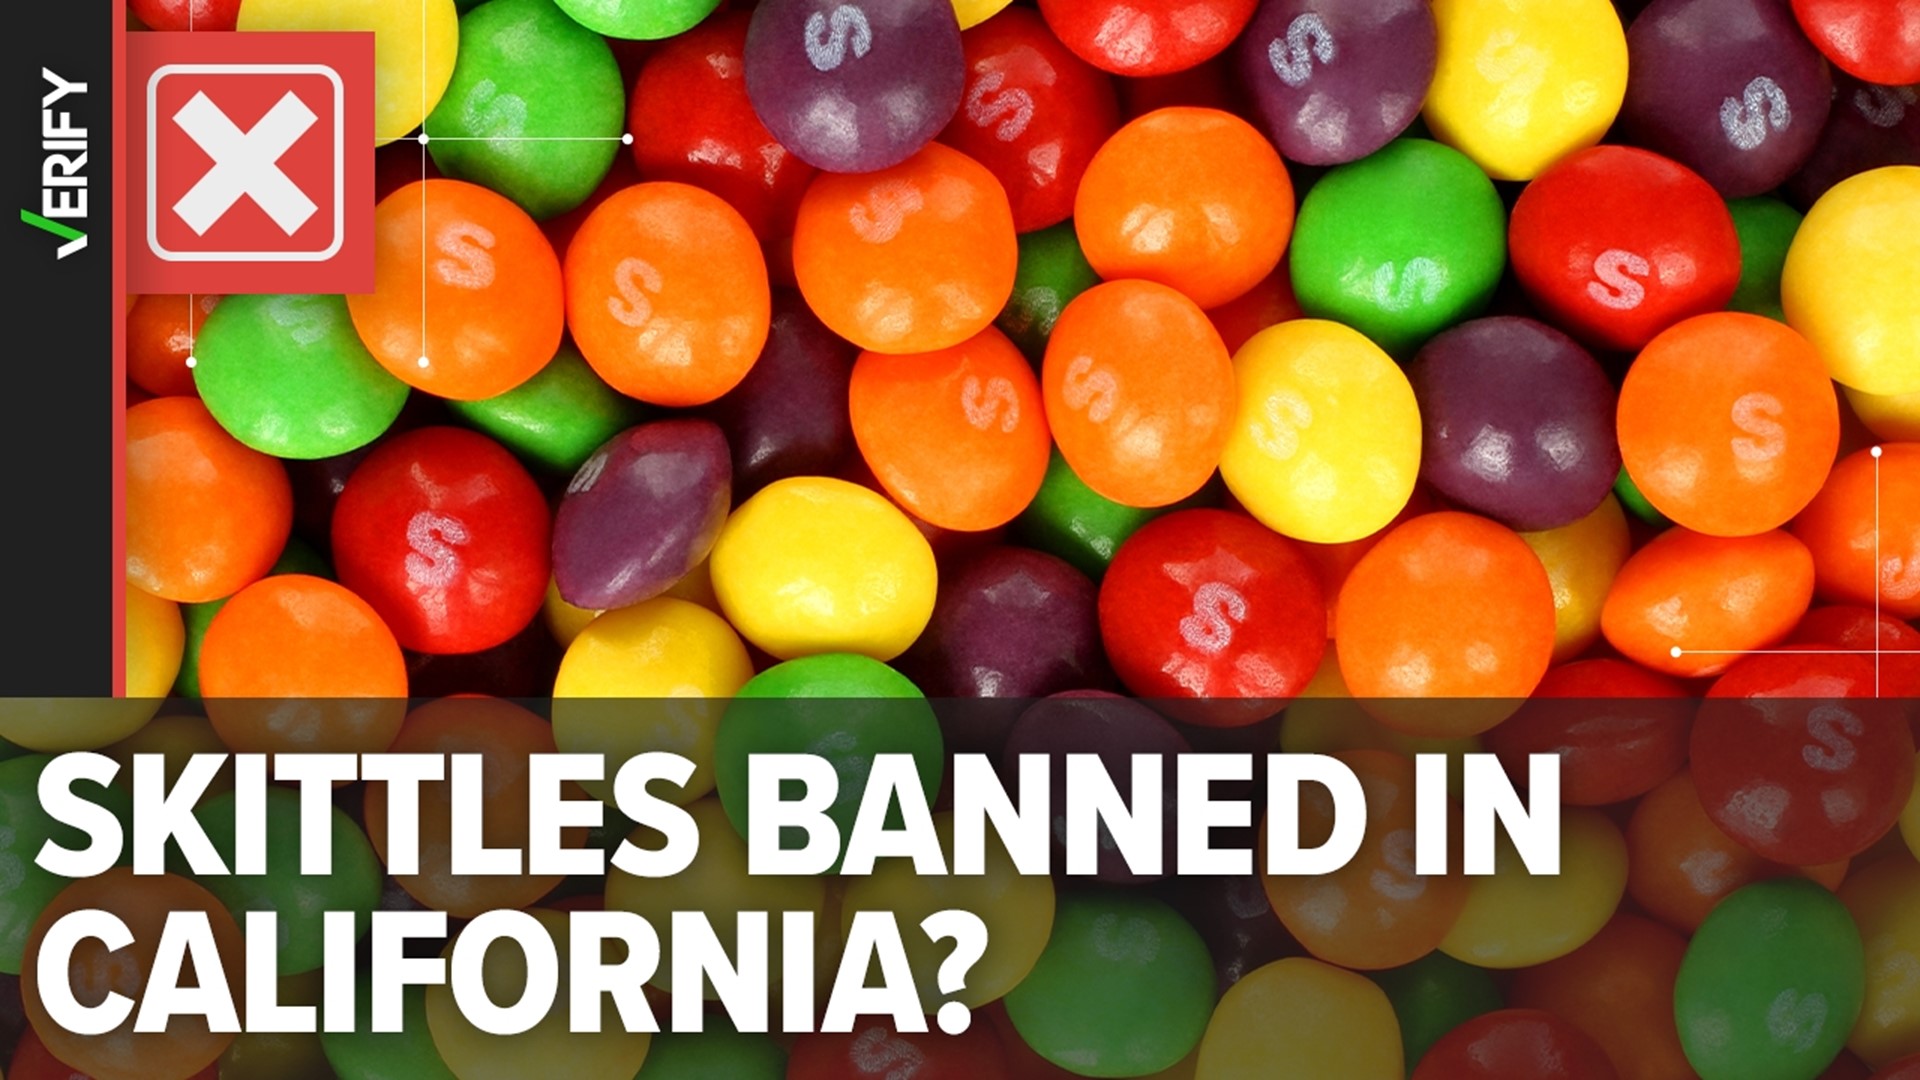 A new California law doesn’t ban Skittles. Here’s what the California Food Safety Act says about red dye No. 3, brominated vegetable oil and titanium dioxide.